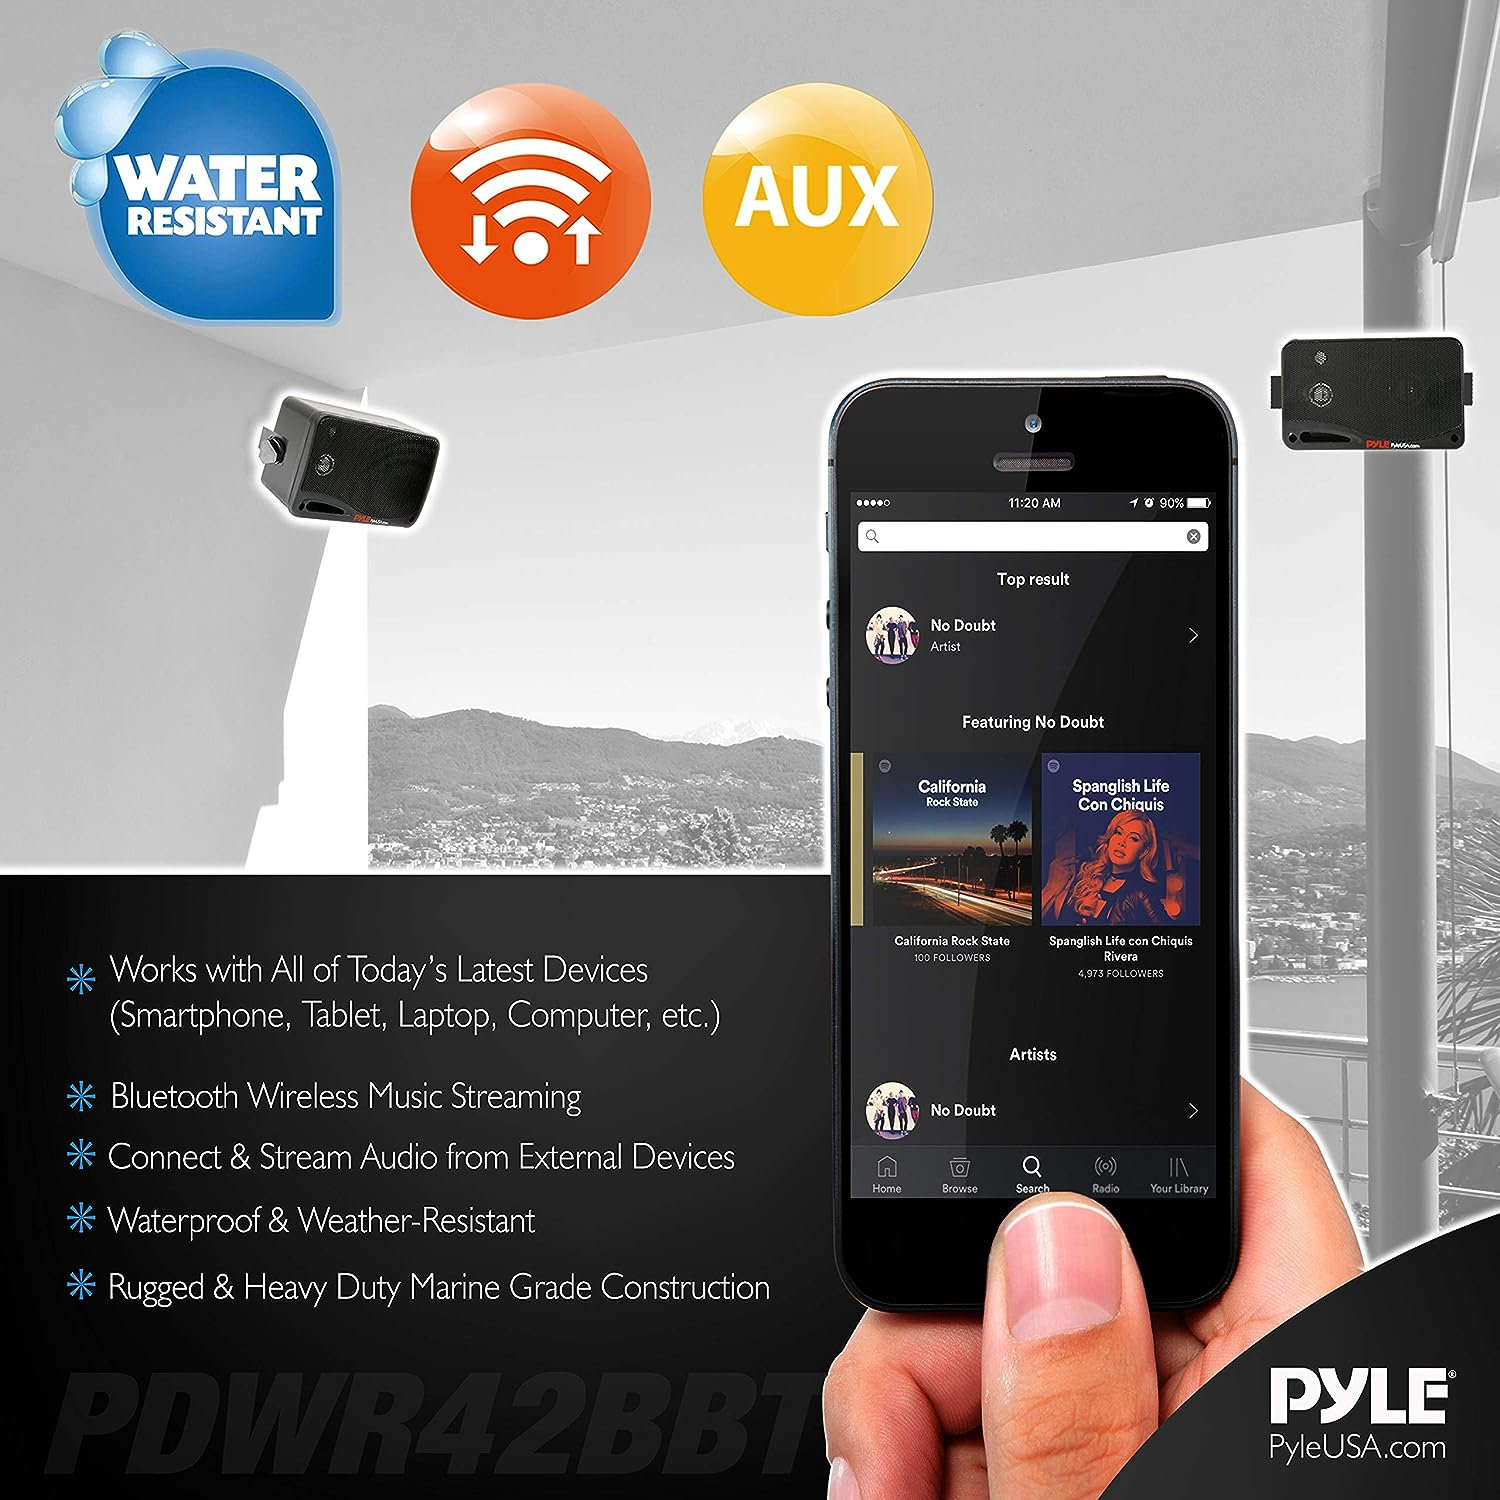 Pyle Outdoor Waterproof Wireless Bluetooth Speaker - 3.5 Inch Pair 3-way Active Passive Weatherproof Wall, Ceiling Mount Dual Speakers System w/ Heavy Duty Grill, Patio, Indoor Use -PDWR42WBT (White)